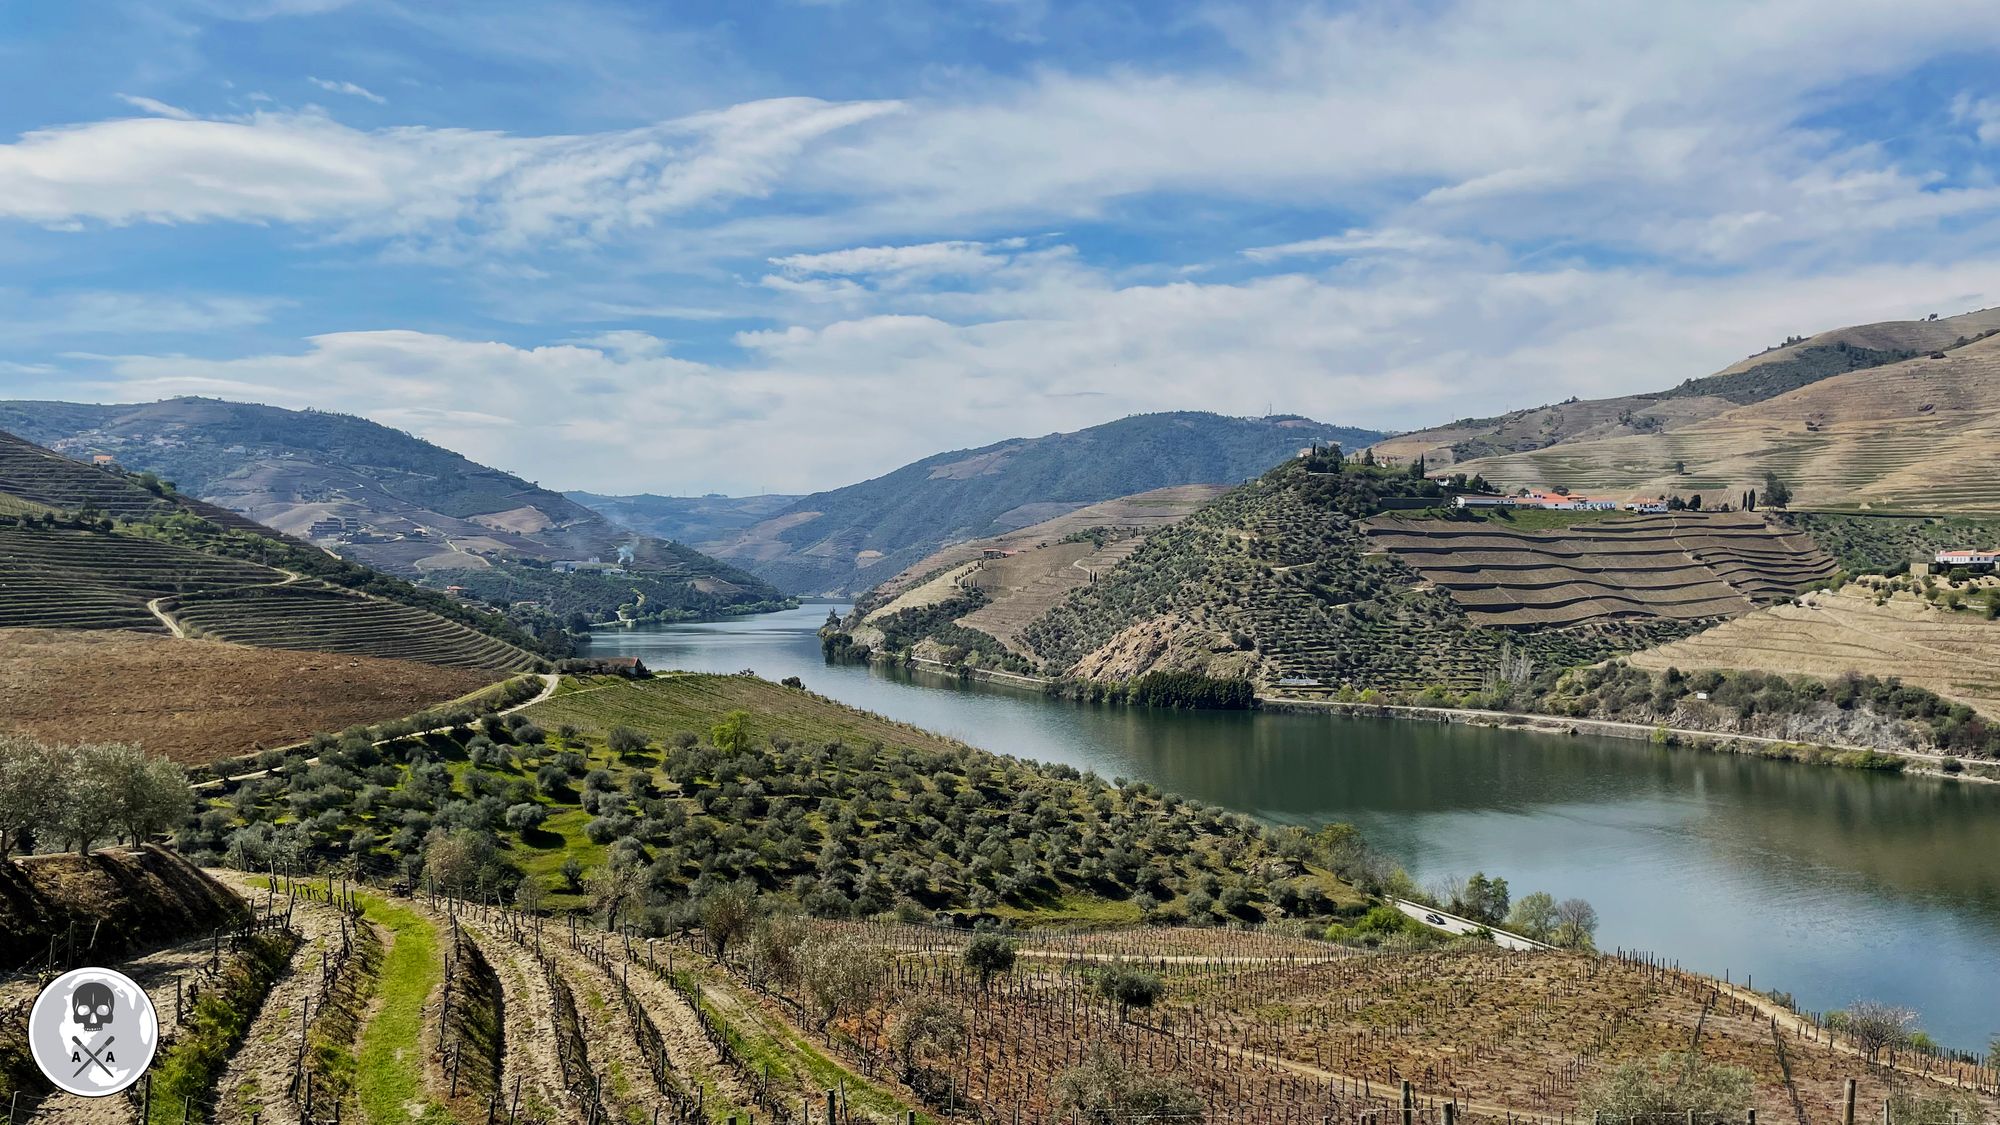 Douro Valley hills covered in vineyards surround the Douro River